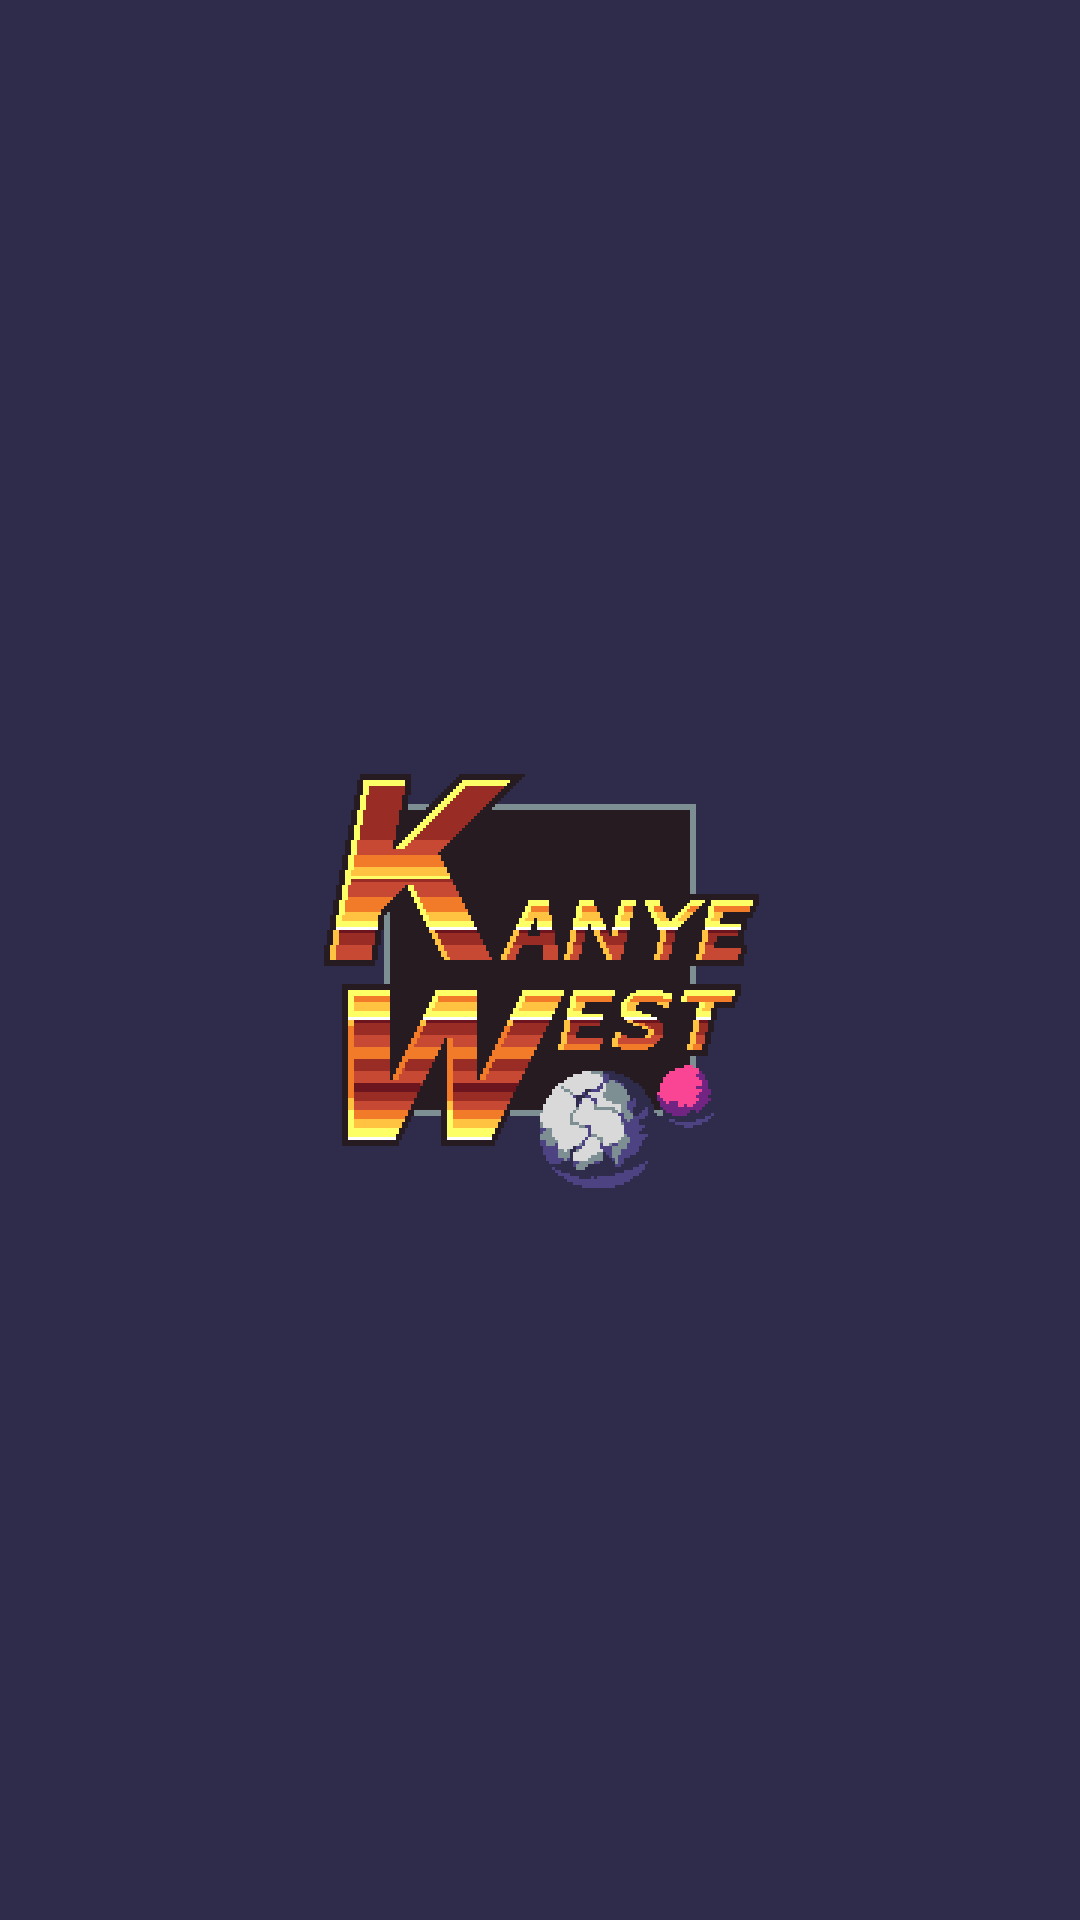 15 Kanye West Wallpapers  Backgrounds for Your iPhone  Gridfiti  Kanye  west wallpaper Yeezus wallpaper Wallpaper backgrounds